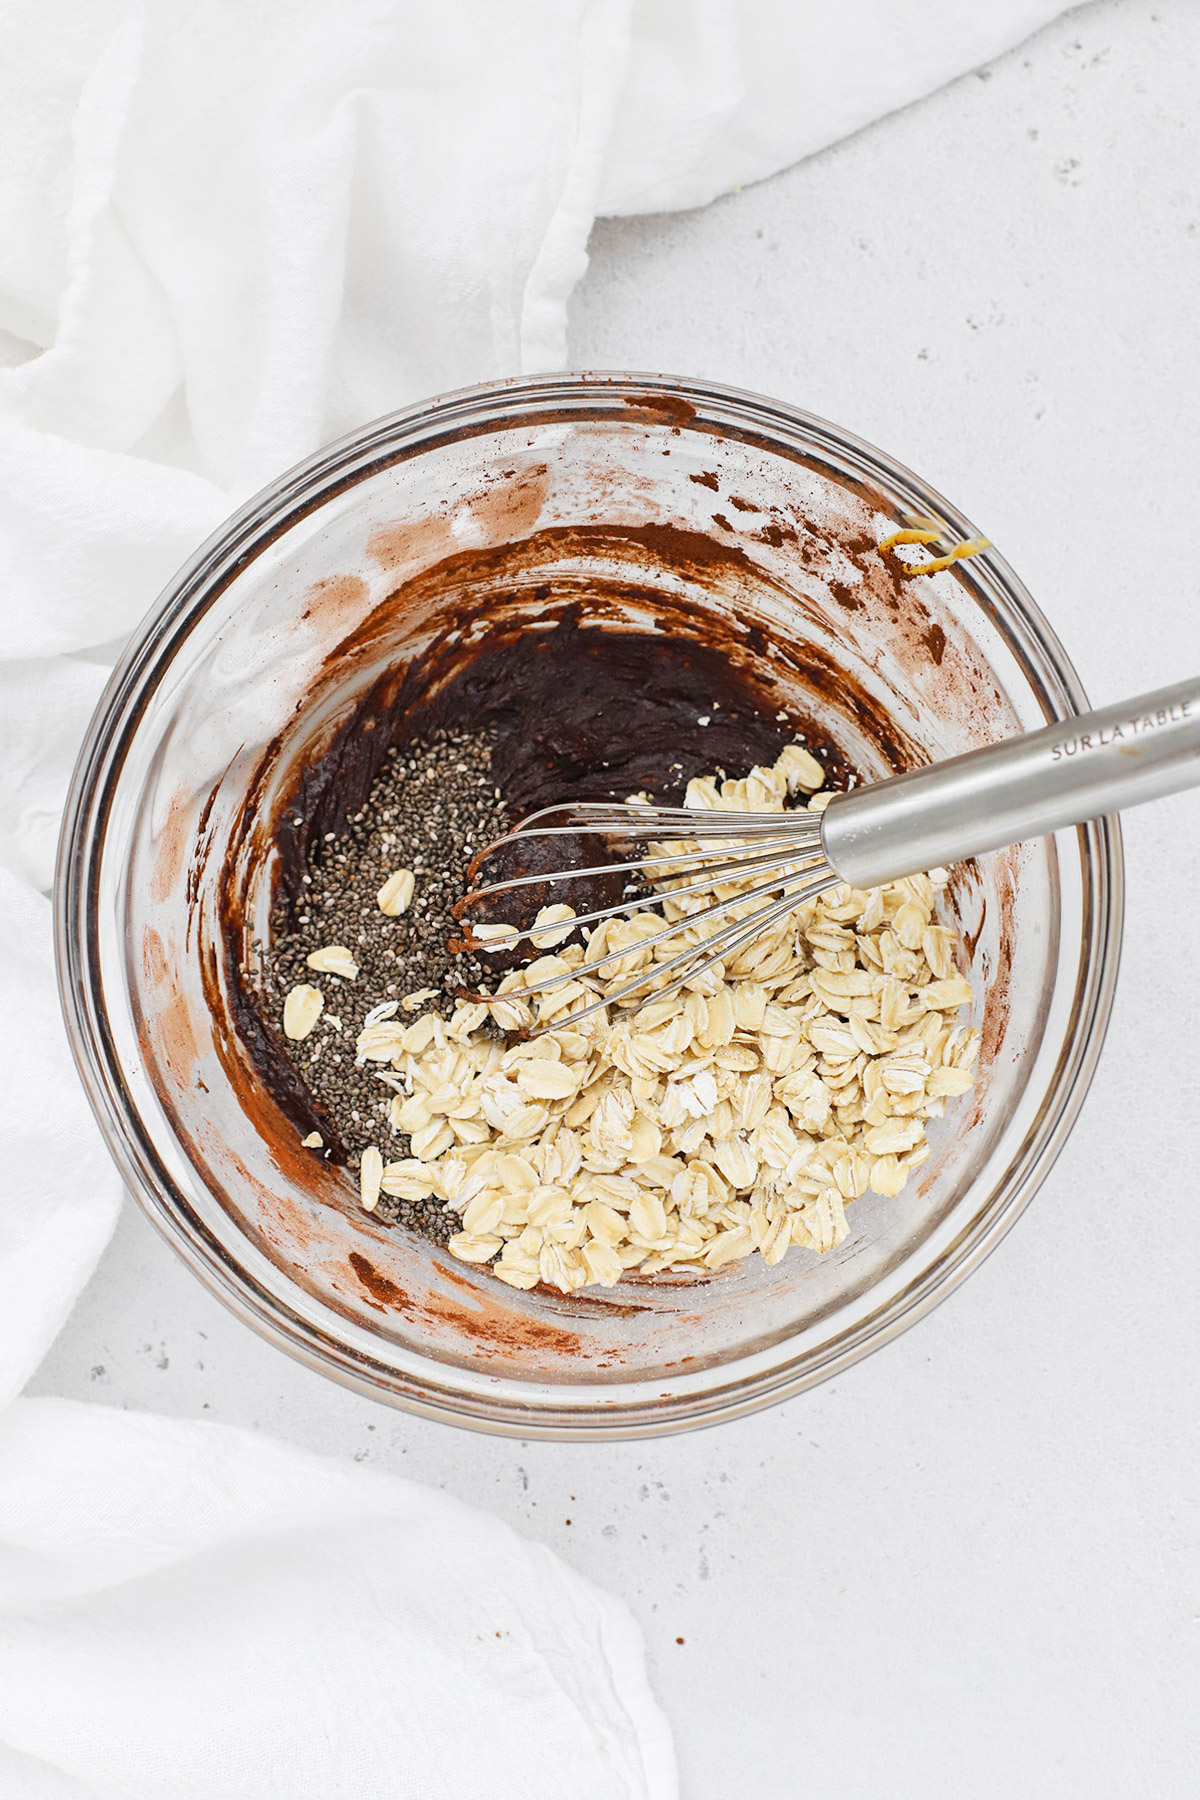 Adding oats and chia seeds to a chocolate peanut butter mixture to make peanut butter cup overnight oats